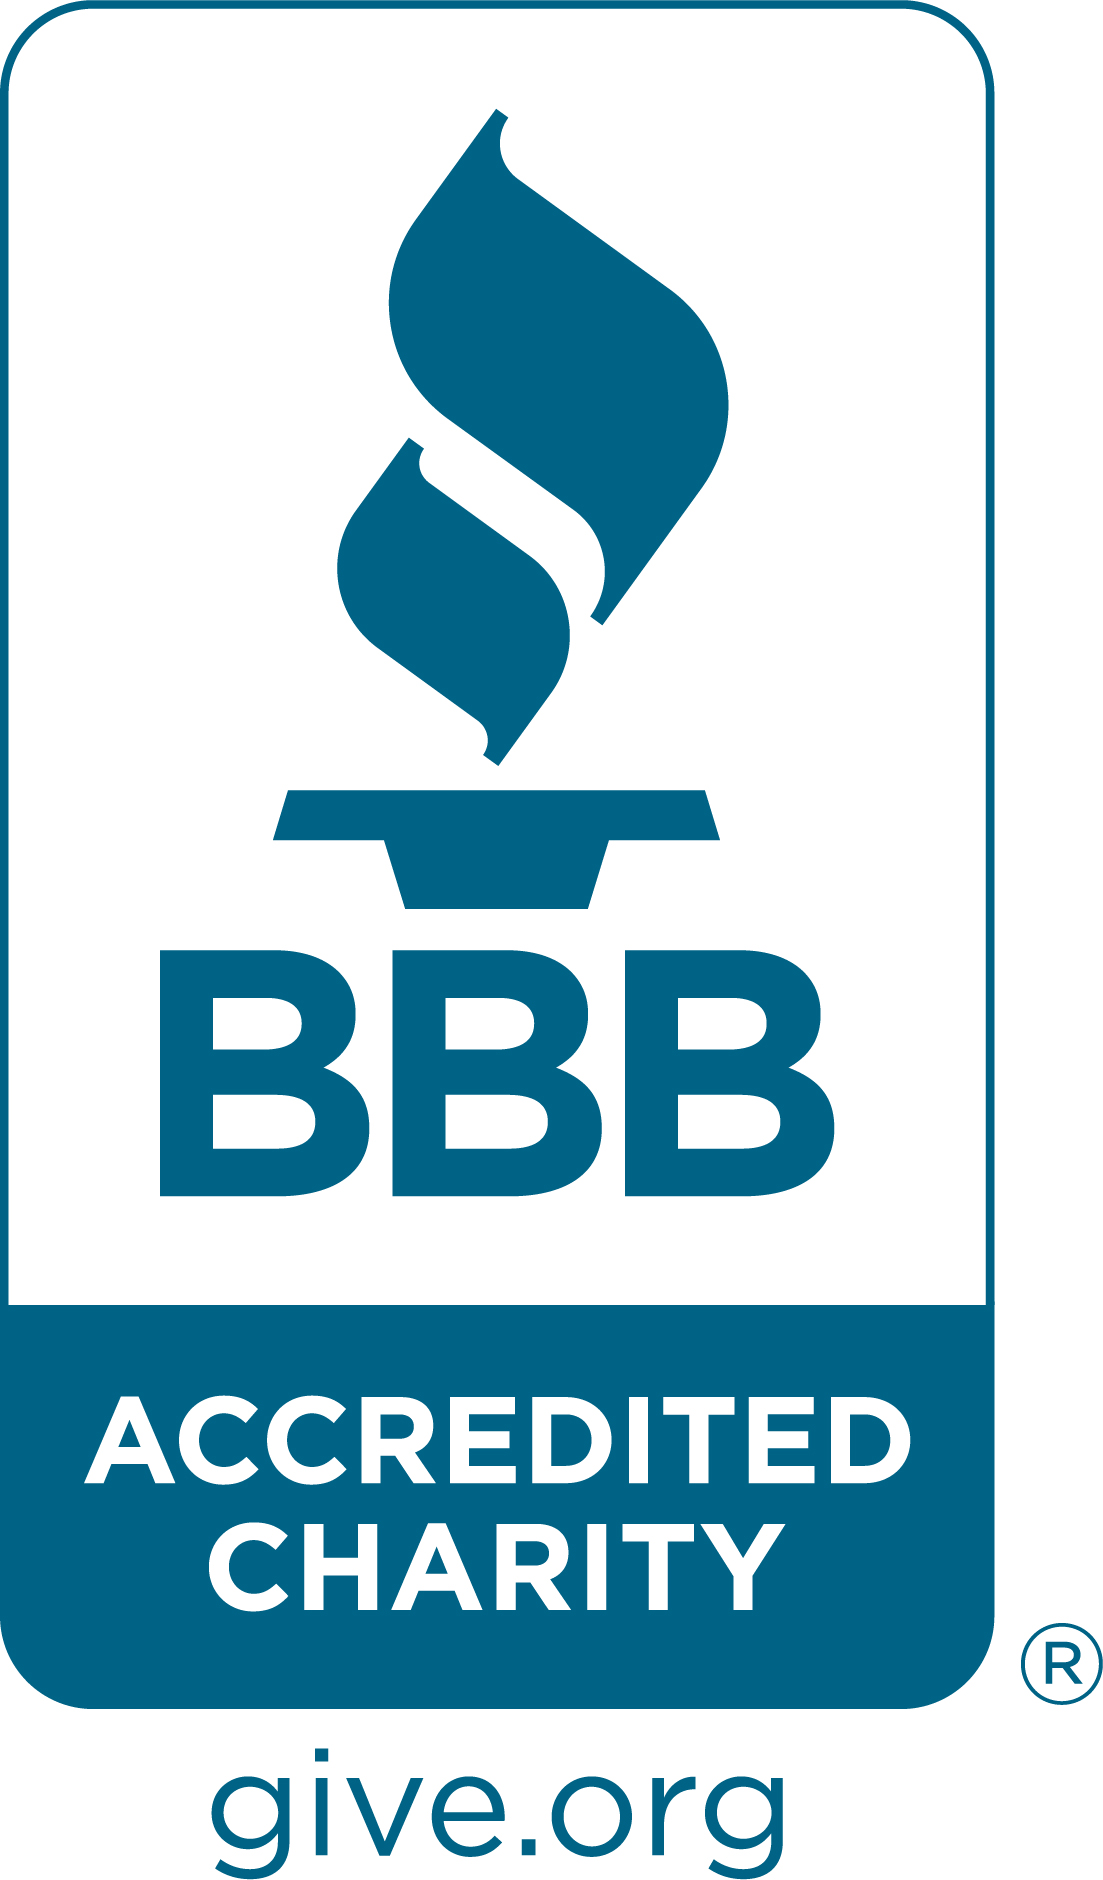 Accredited charity by BBB.org